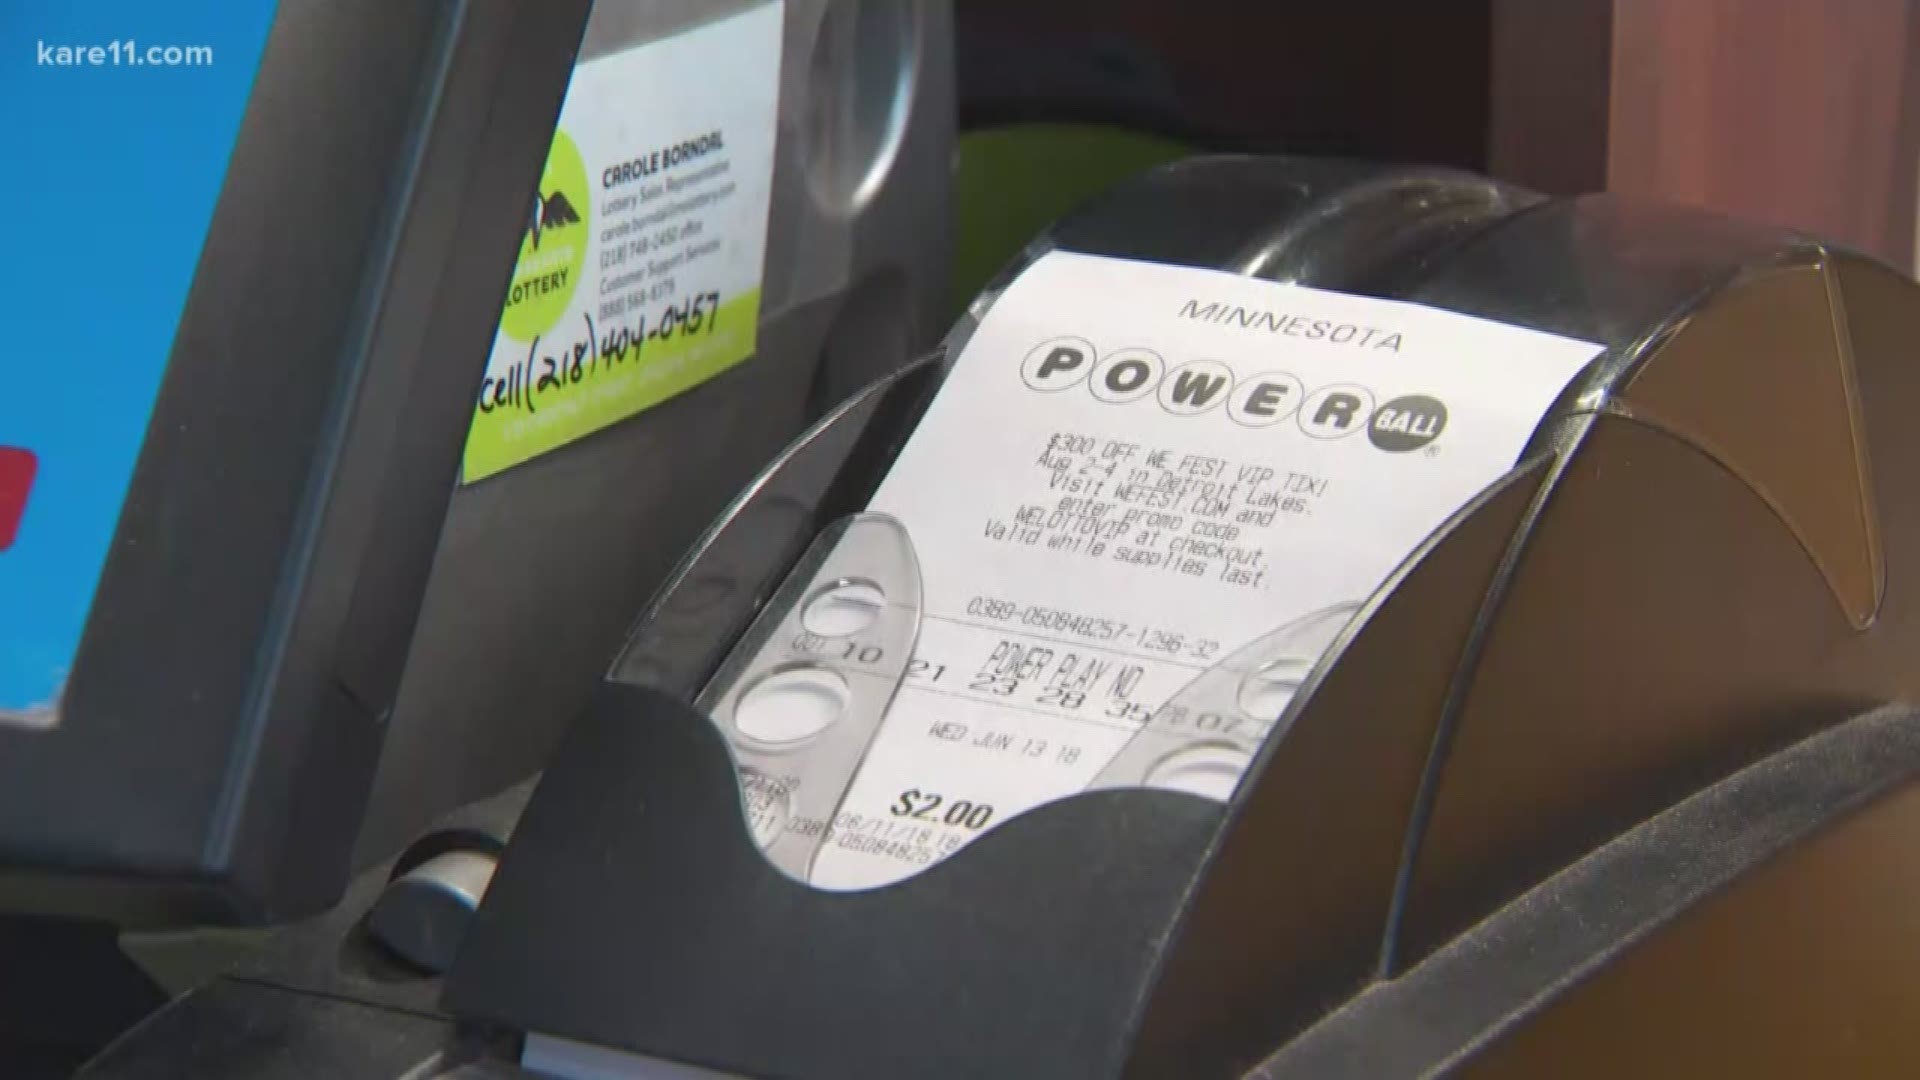 Two Powerball tickets worth $1 million each have been sold in Carlton, Minnesota in the past three weeks. https://kare11.tv/2JL5tK8